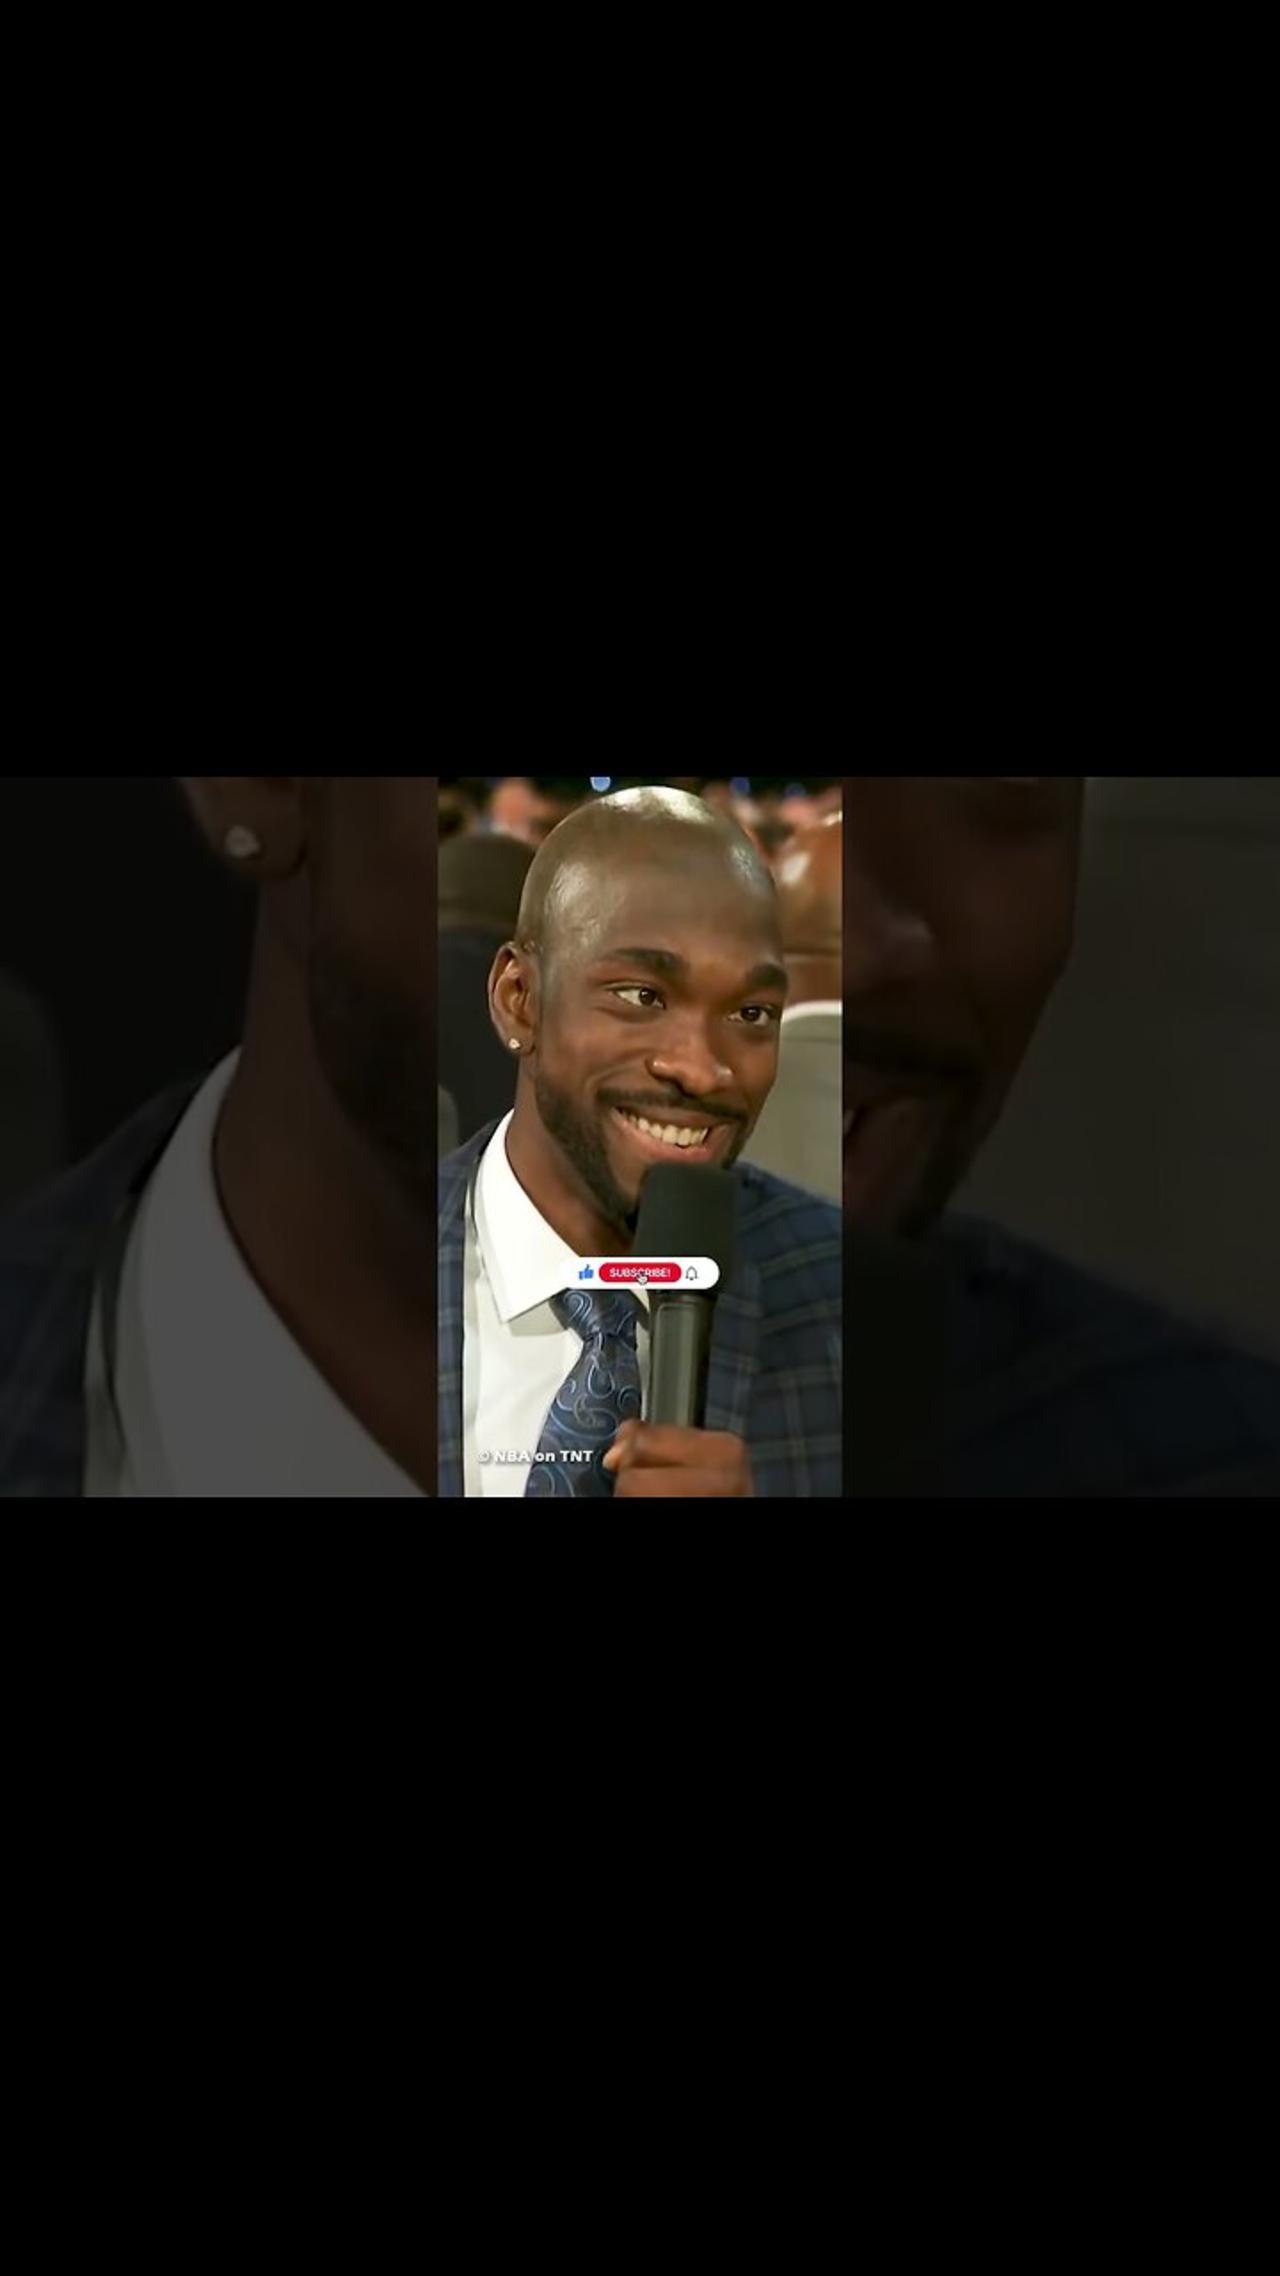 Get Ready to Laugh with Jay Pharoah's Hilarious New Shaq Impression!